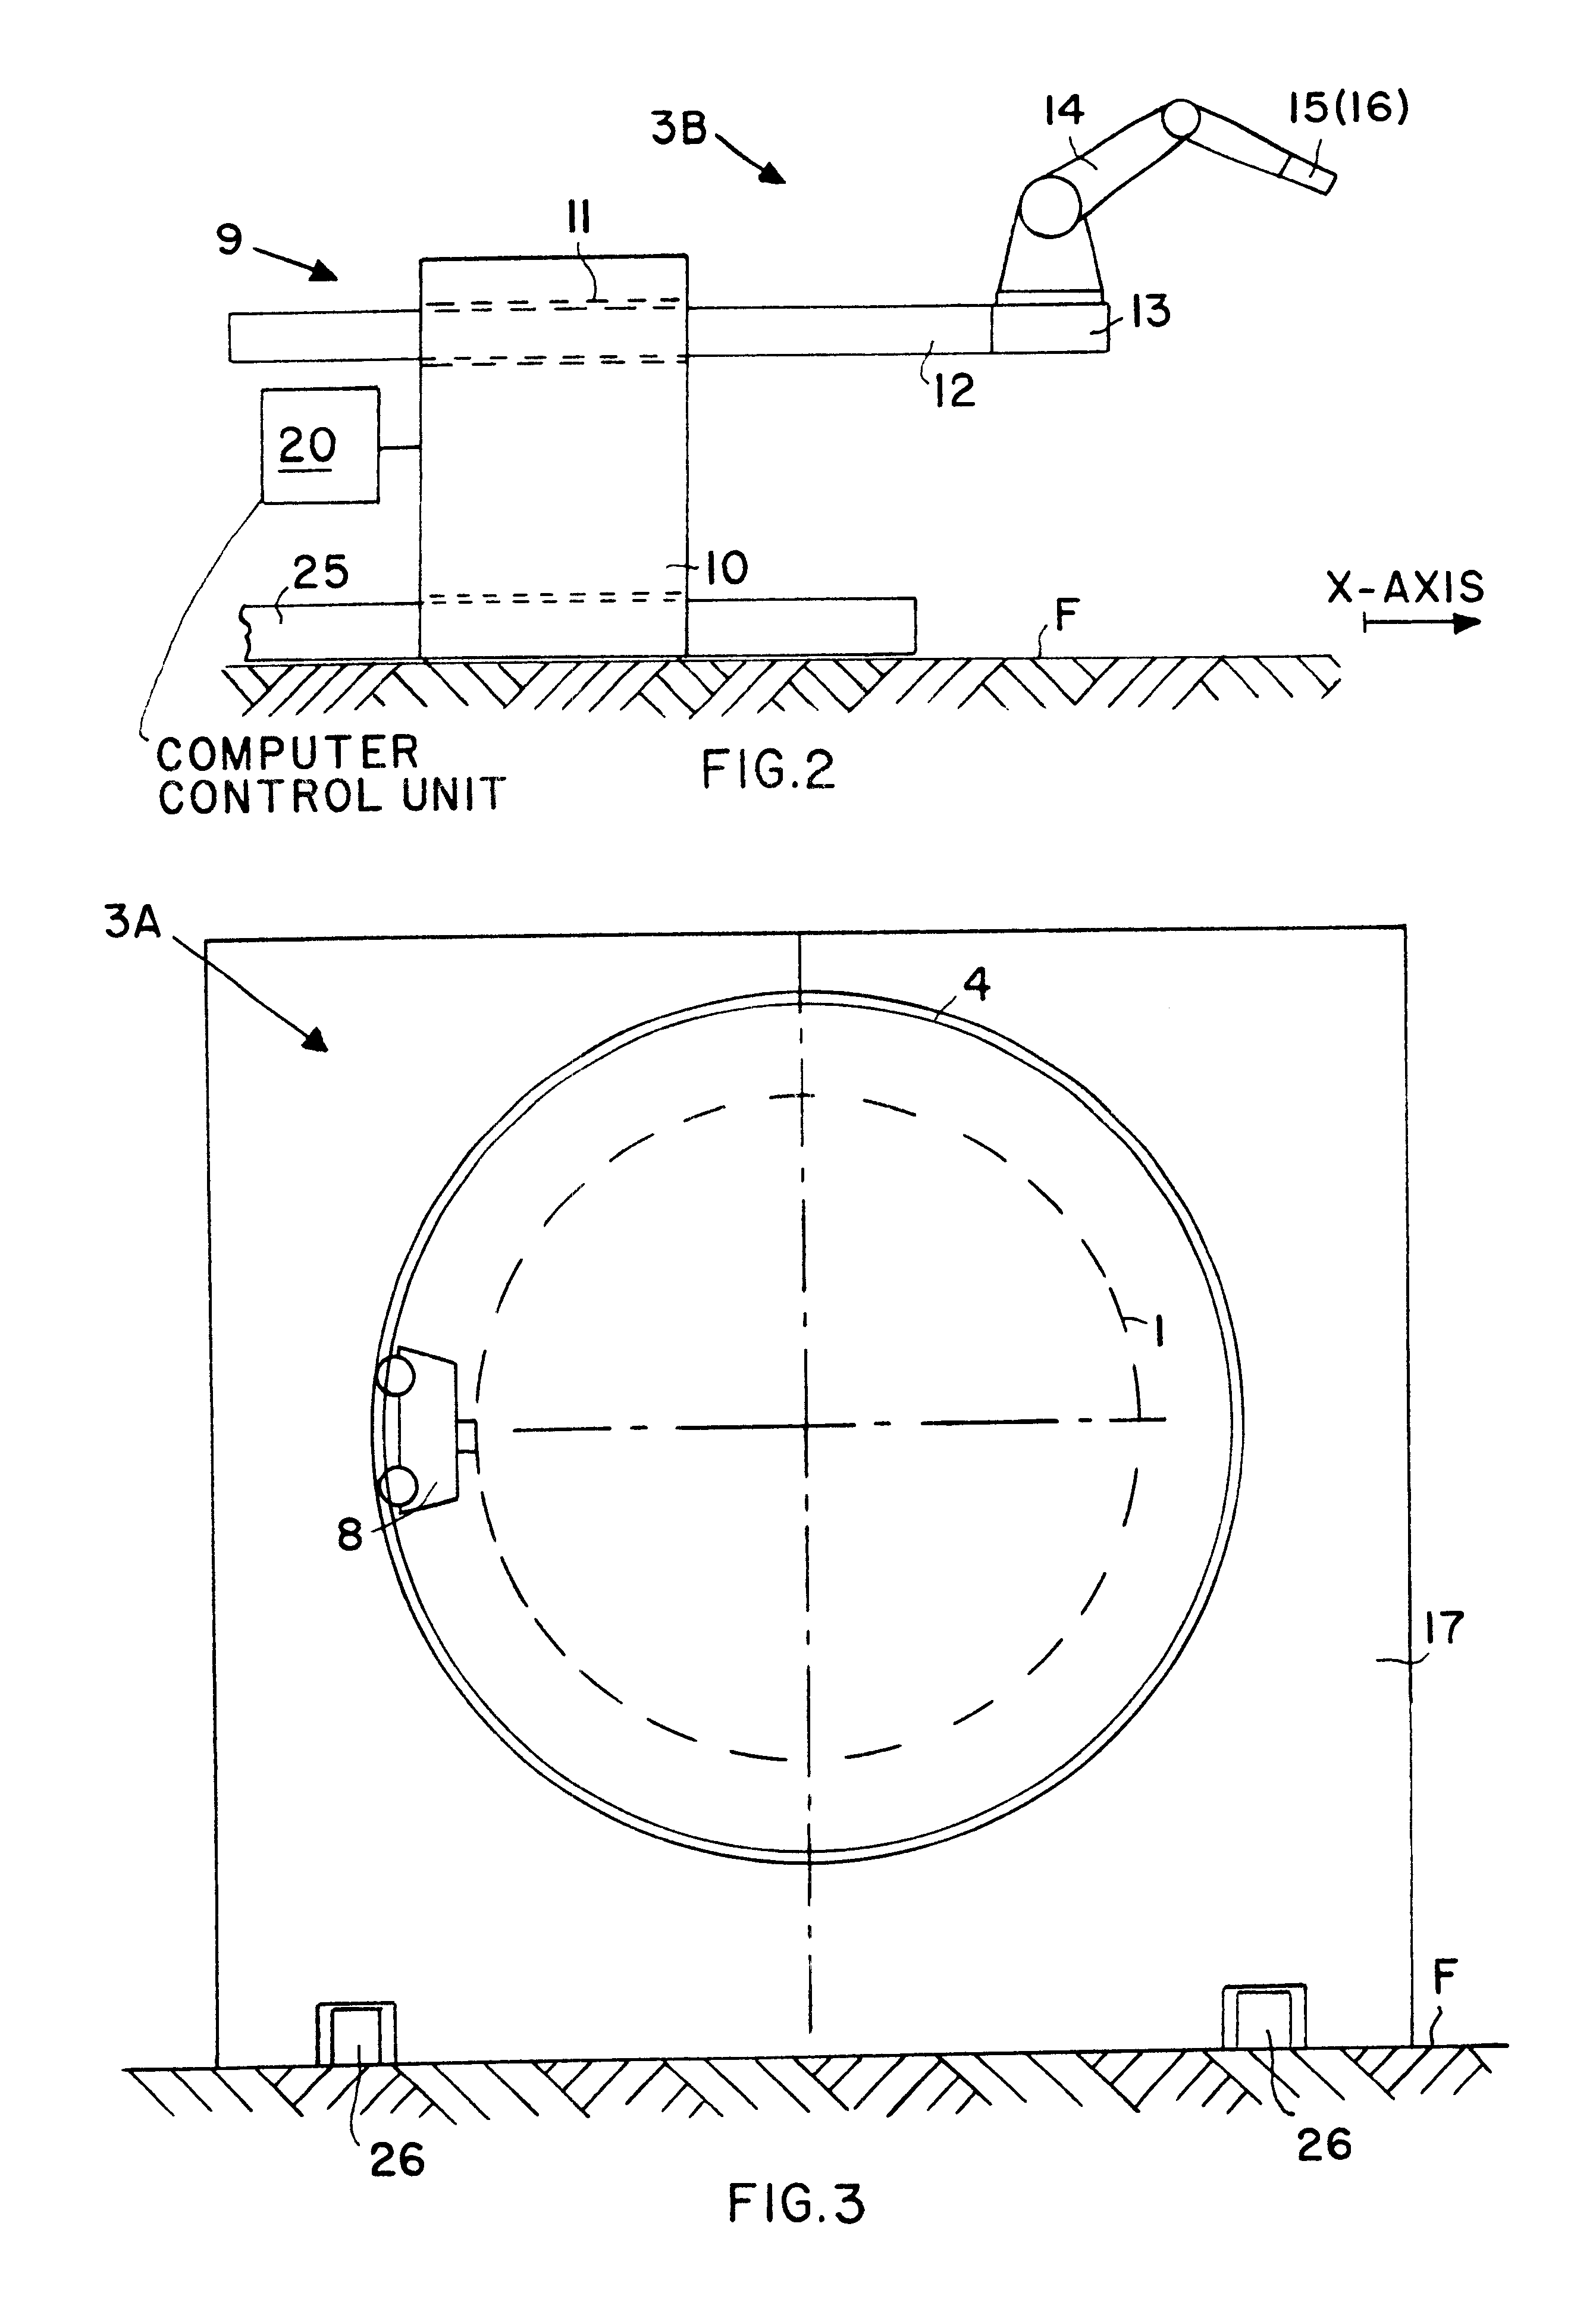 Two-part riveting apparatus and method for riveting barrel-shaped components such as aircraft fuselage components